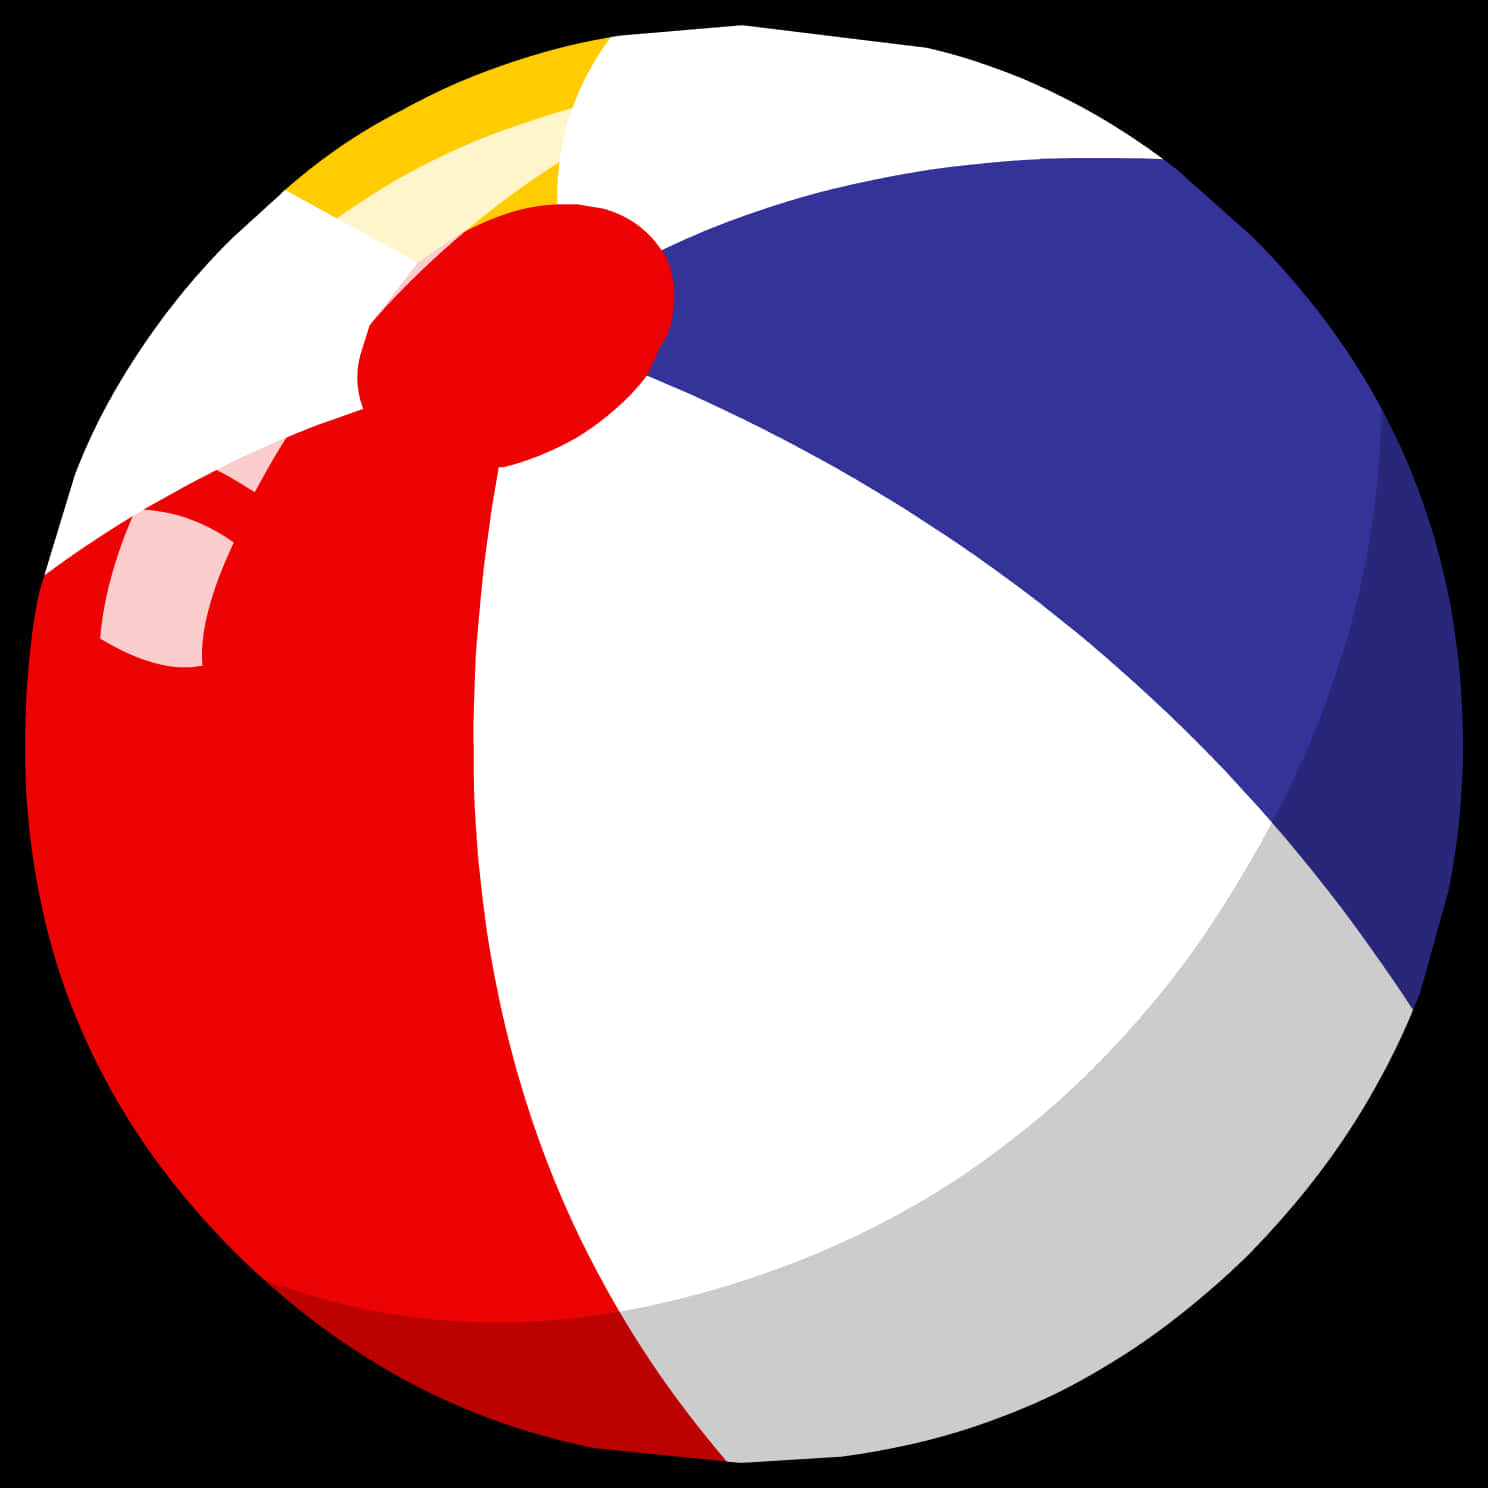 Colorful Beach Ball Graphic PNG